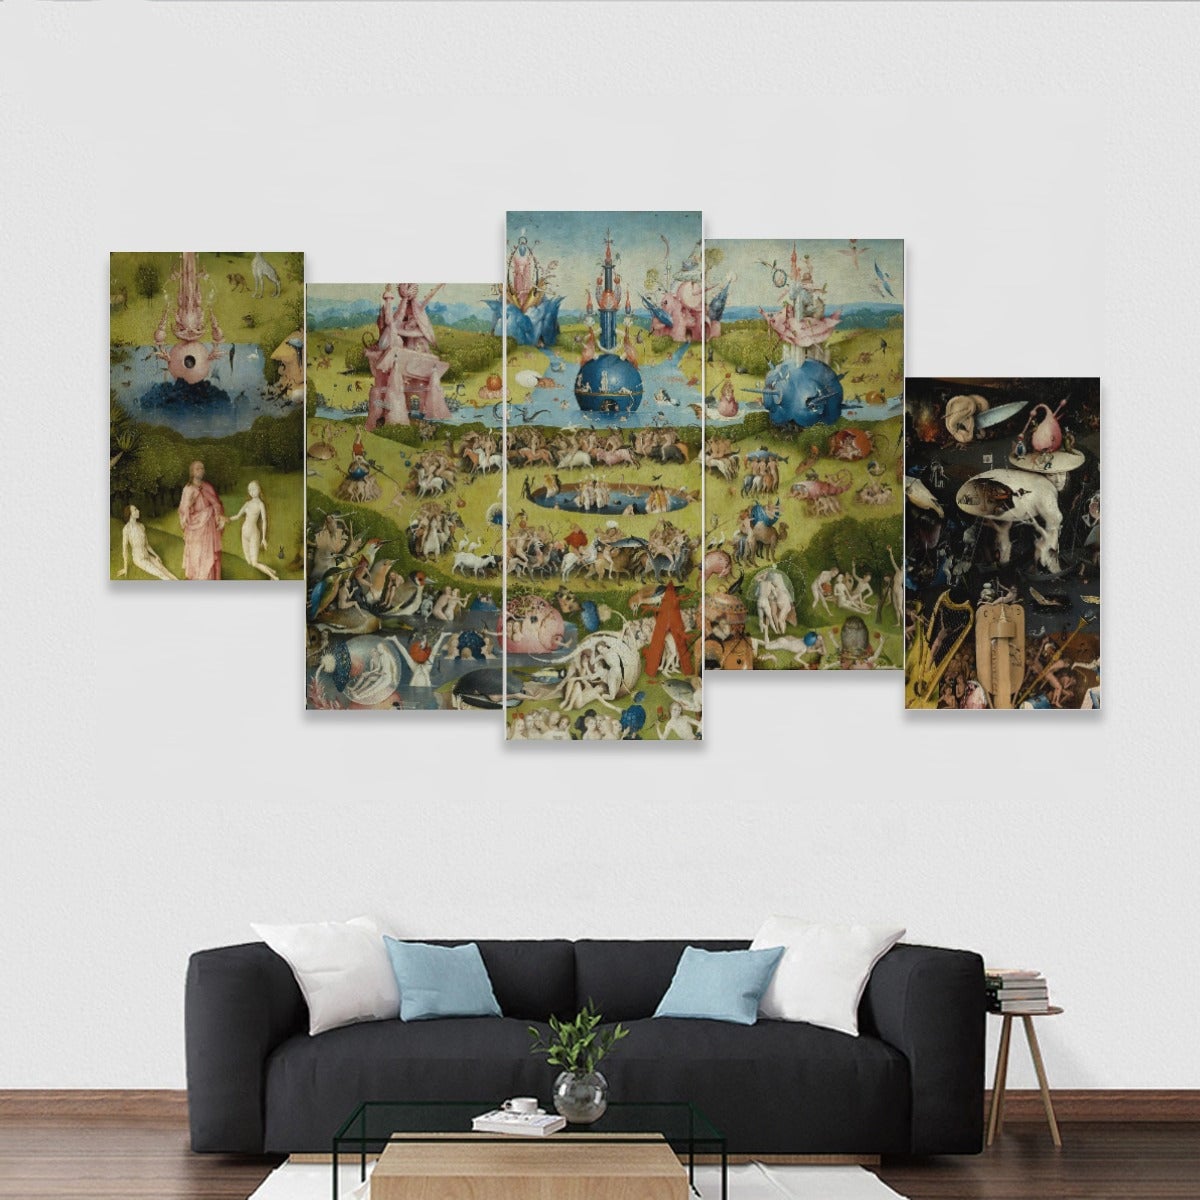 Hieronymus Bosch The Garden of Earthly Delights Framed Murals